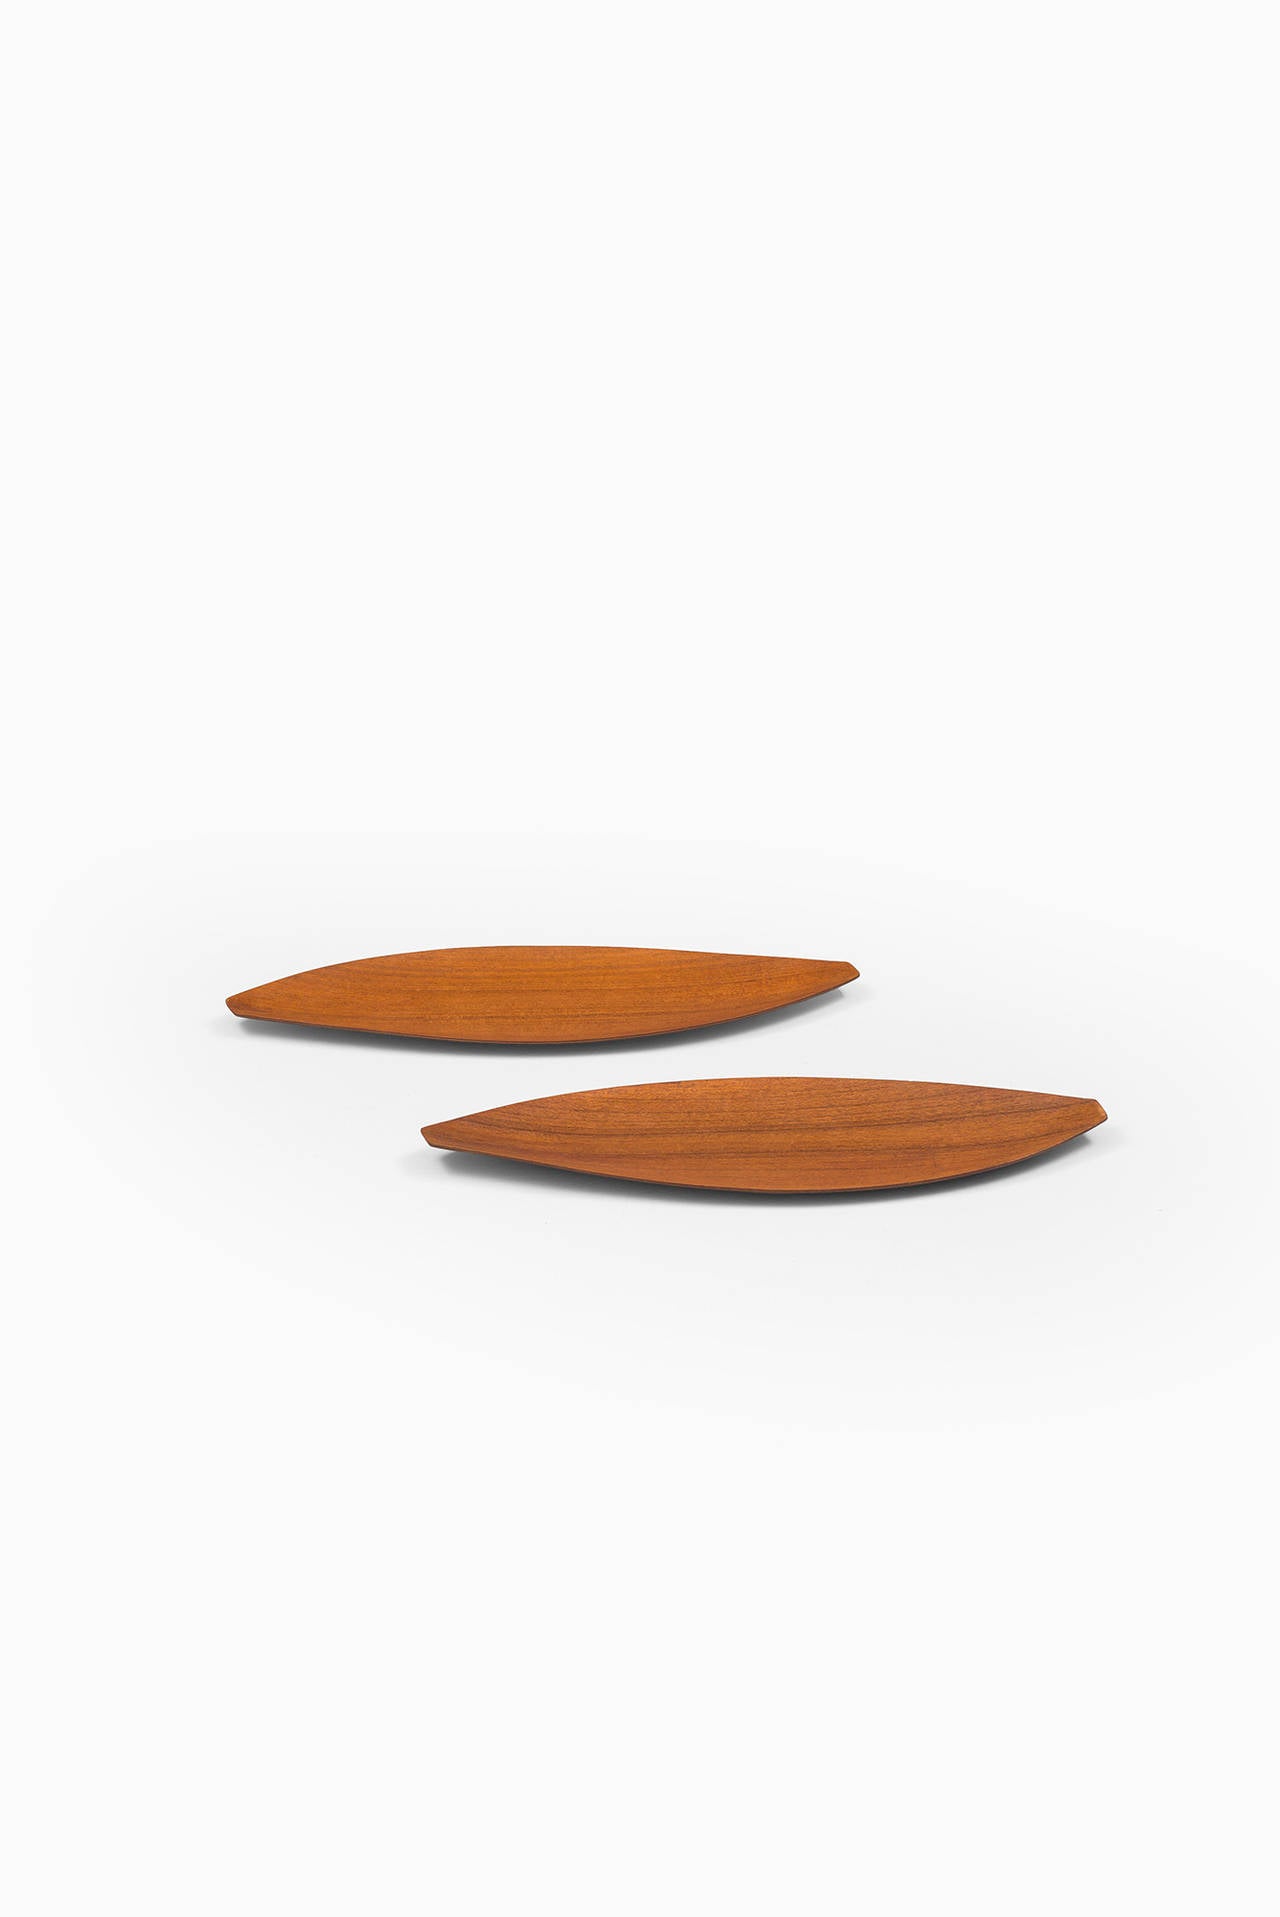 A pair of trays in teak designed by Shigemichi Aomine. Produced by N.C.C. (National Crafts Council) in Japan.